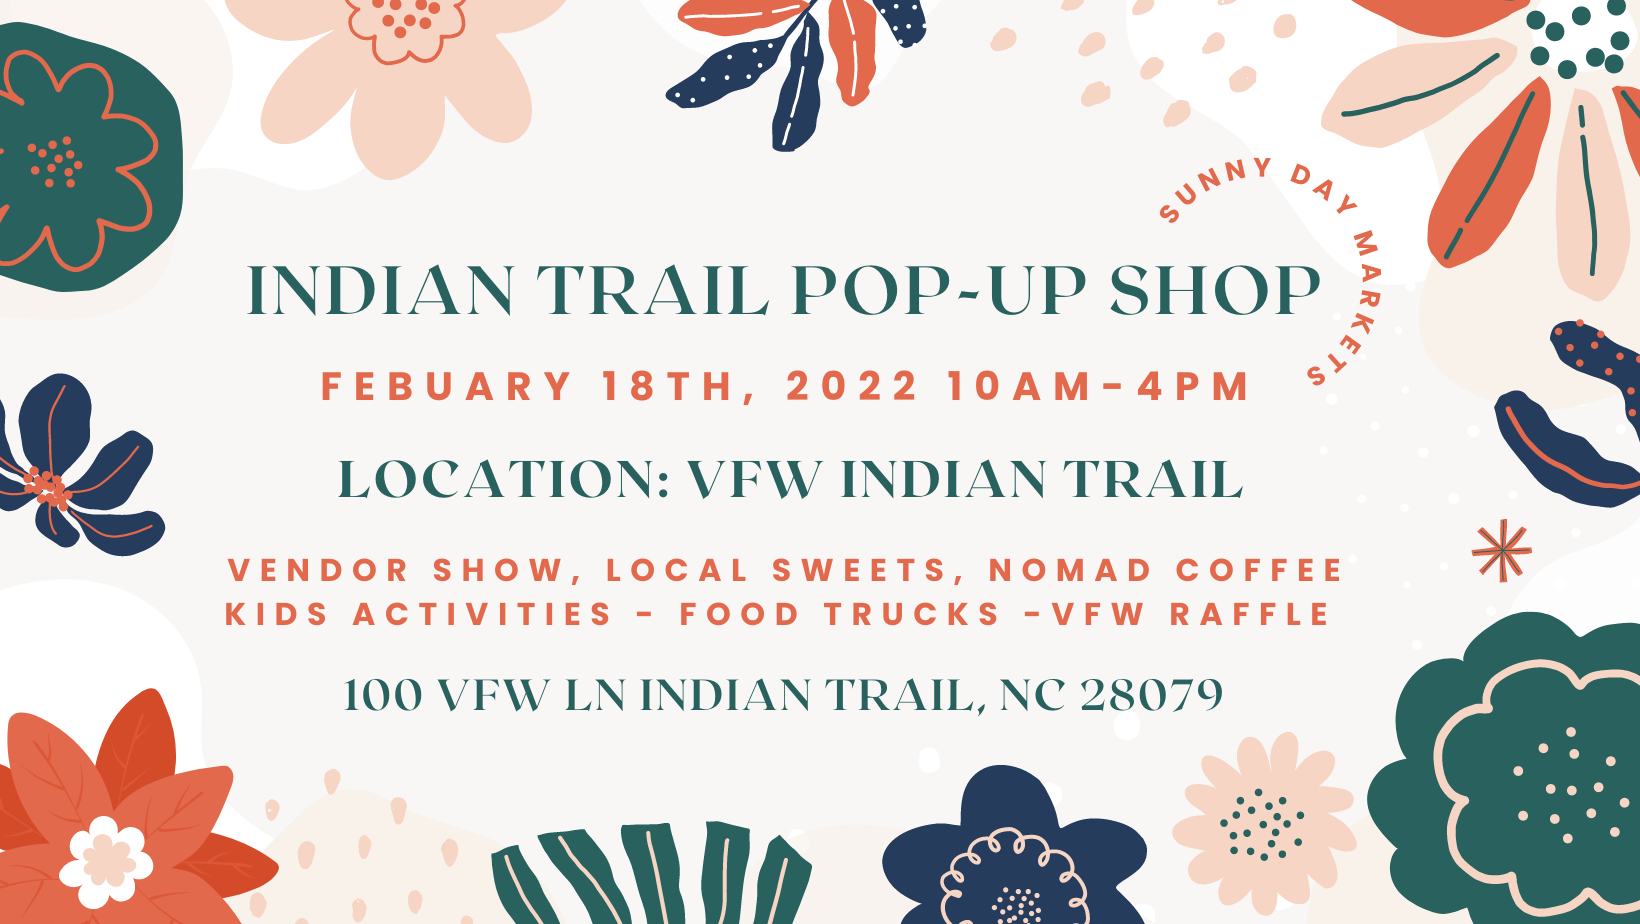 Sunny Day Markets - Indian Trail Pop-up Shop